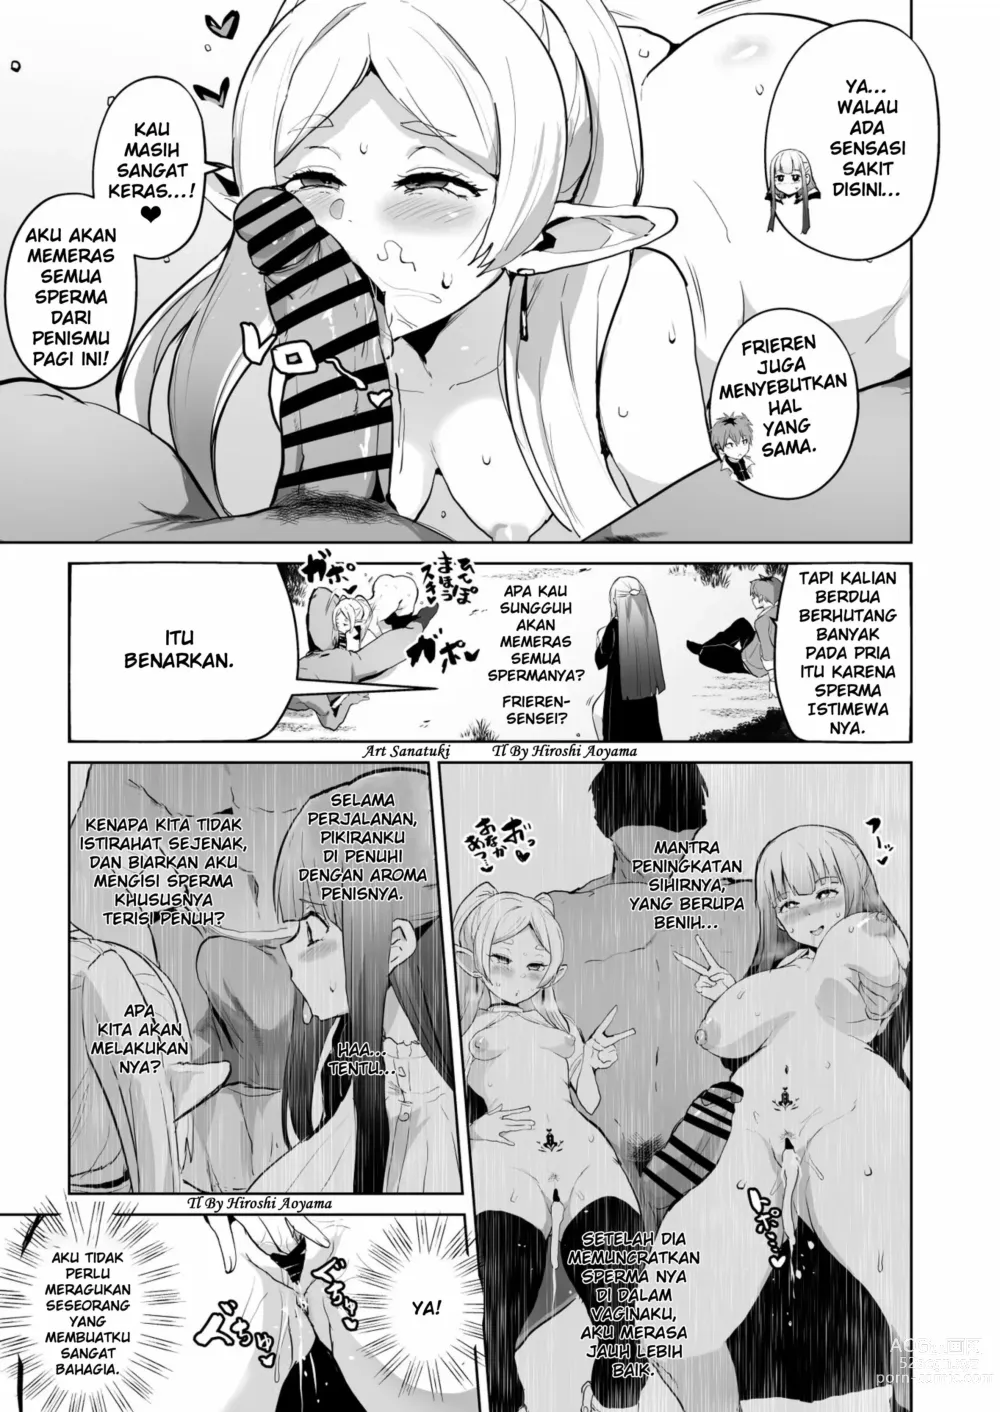 Page 4 of doujinshi Frieren - Common Sense Alteration, Corruption of the Two